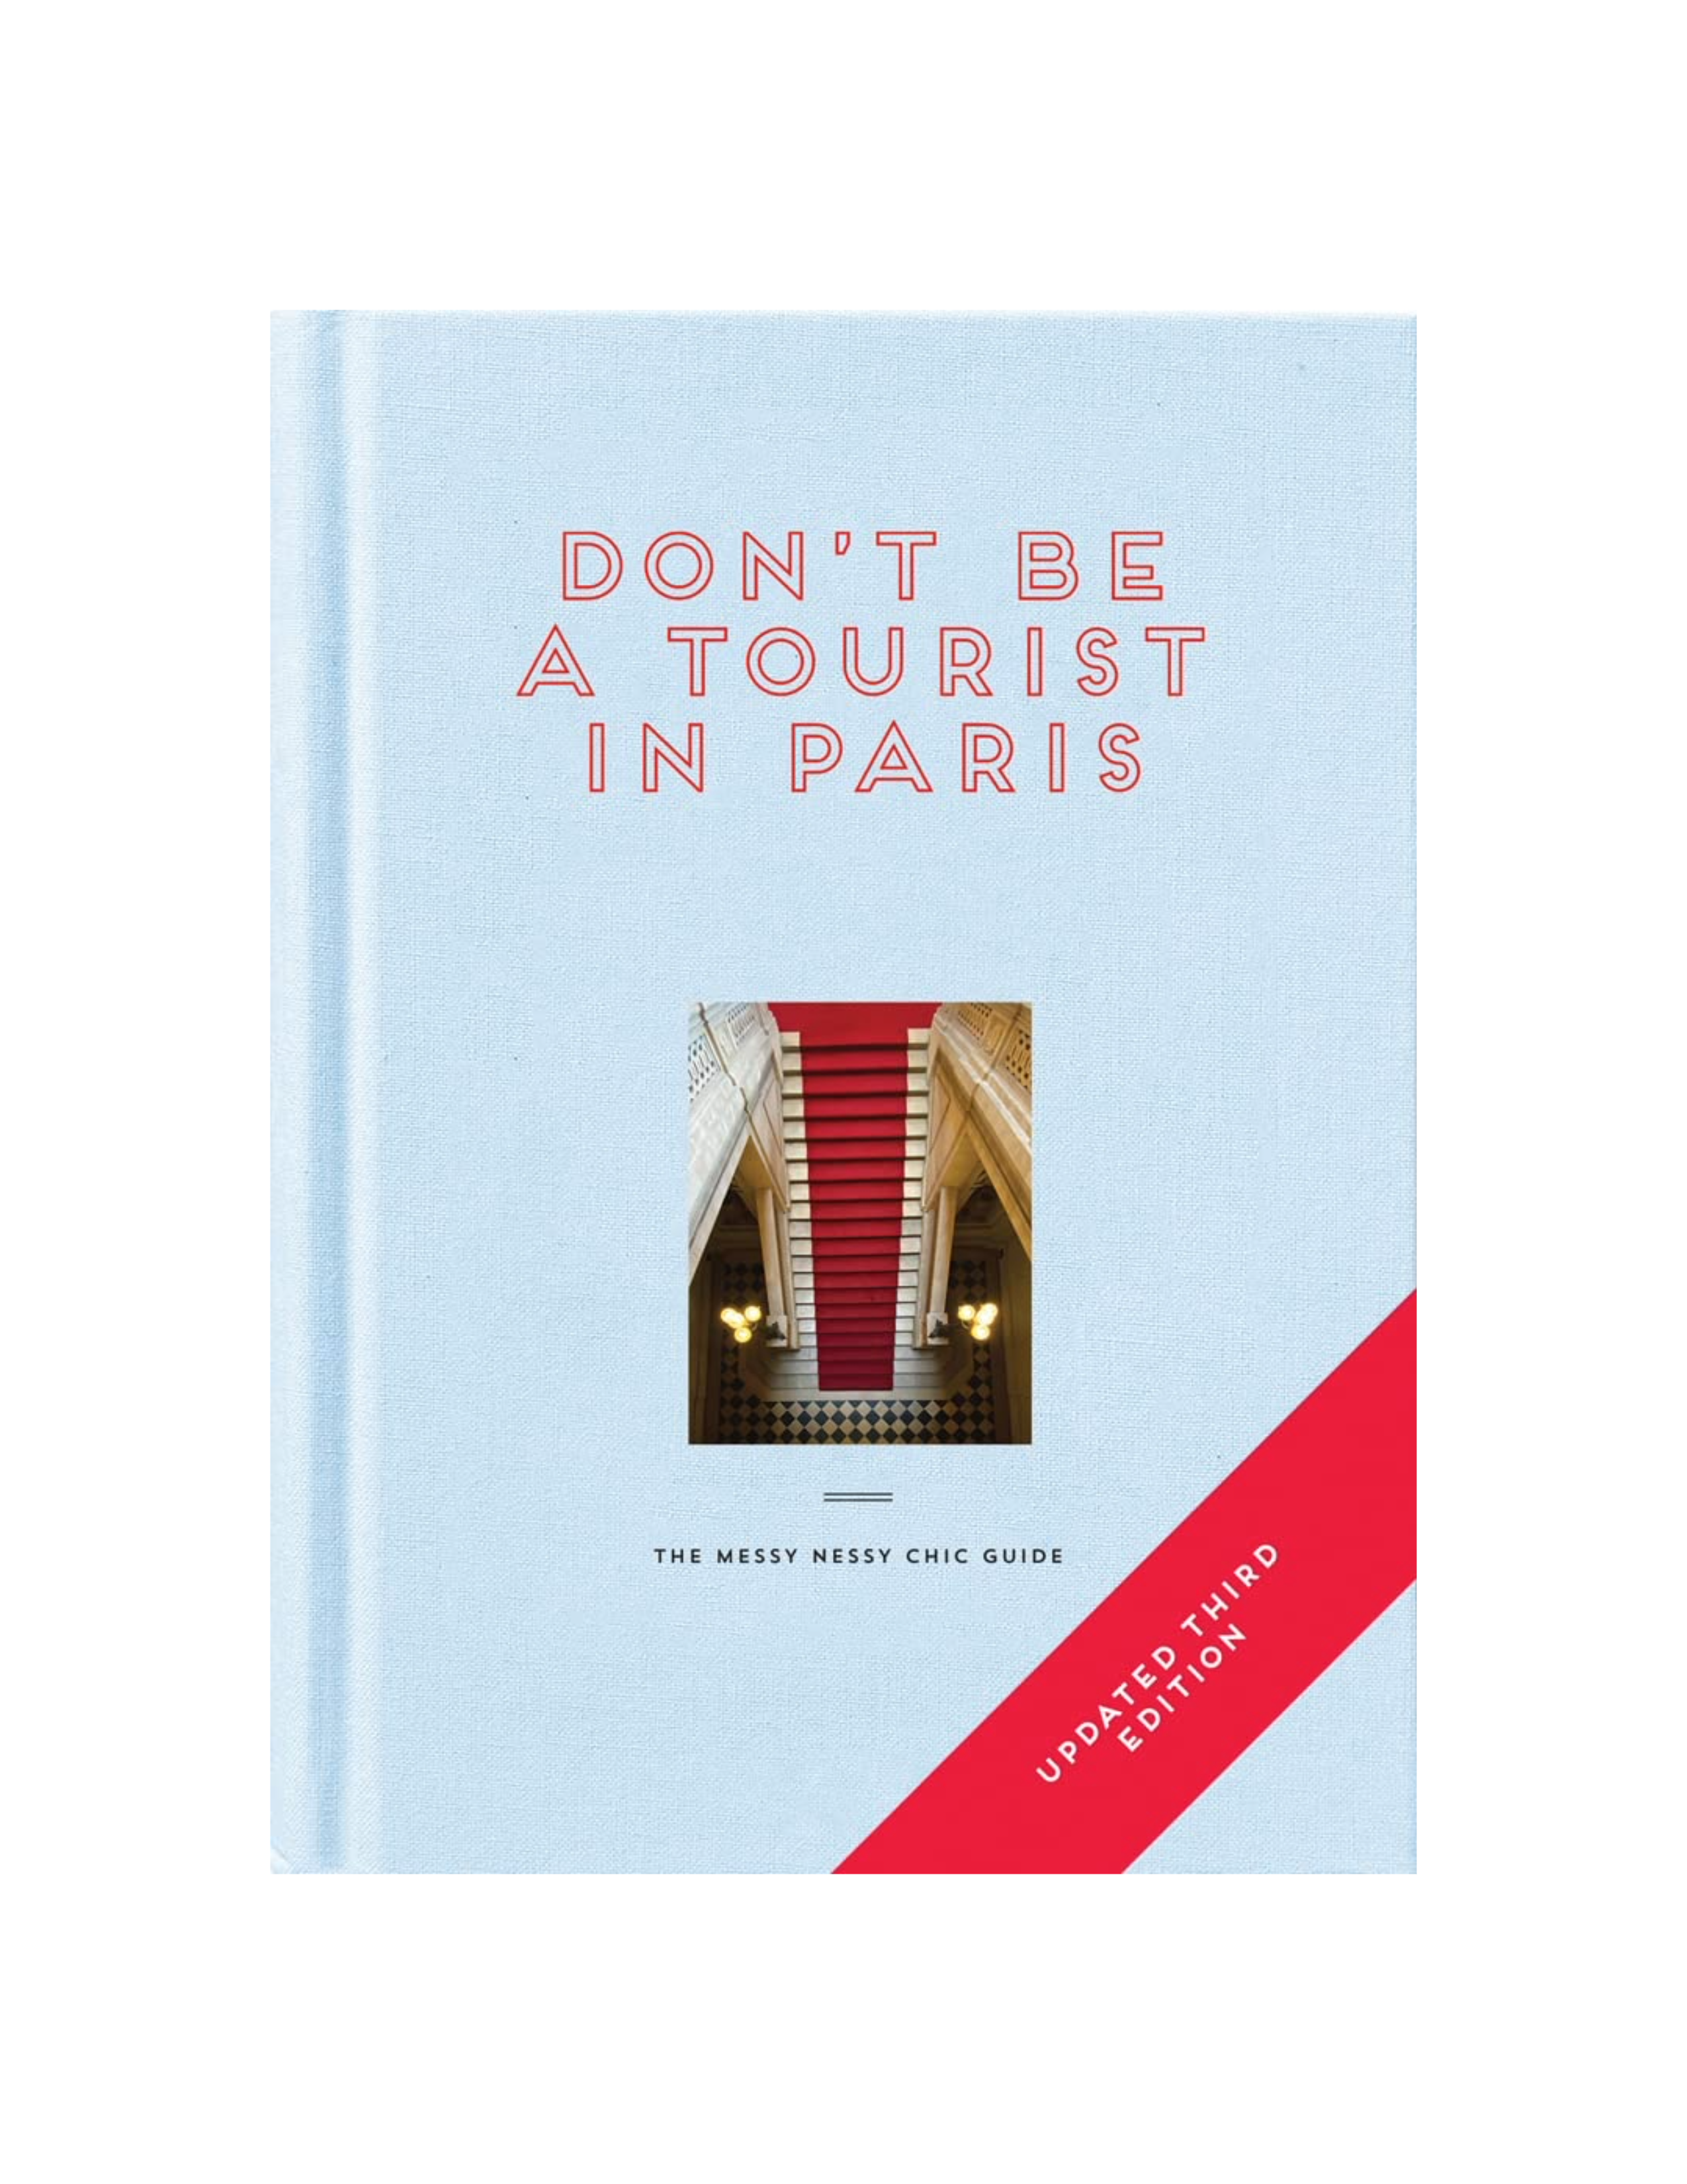 Don't be a Tourist in Paris: The Messy Nessy Chic Guide